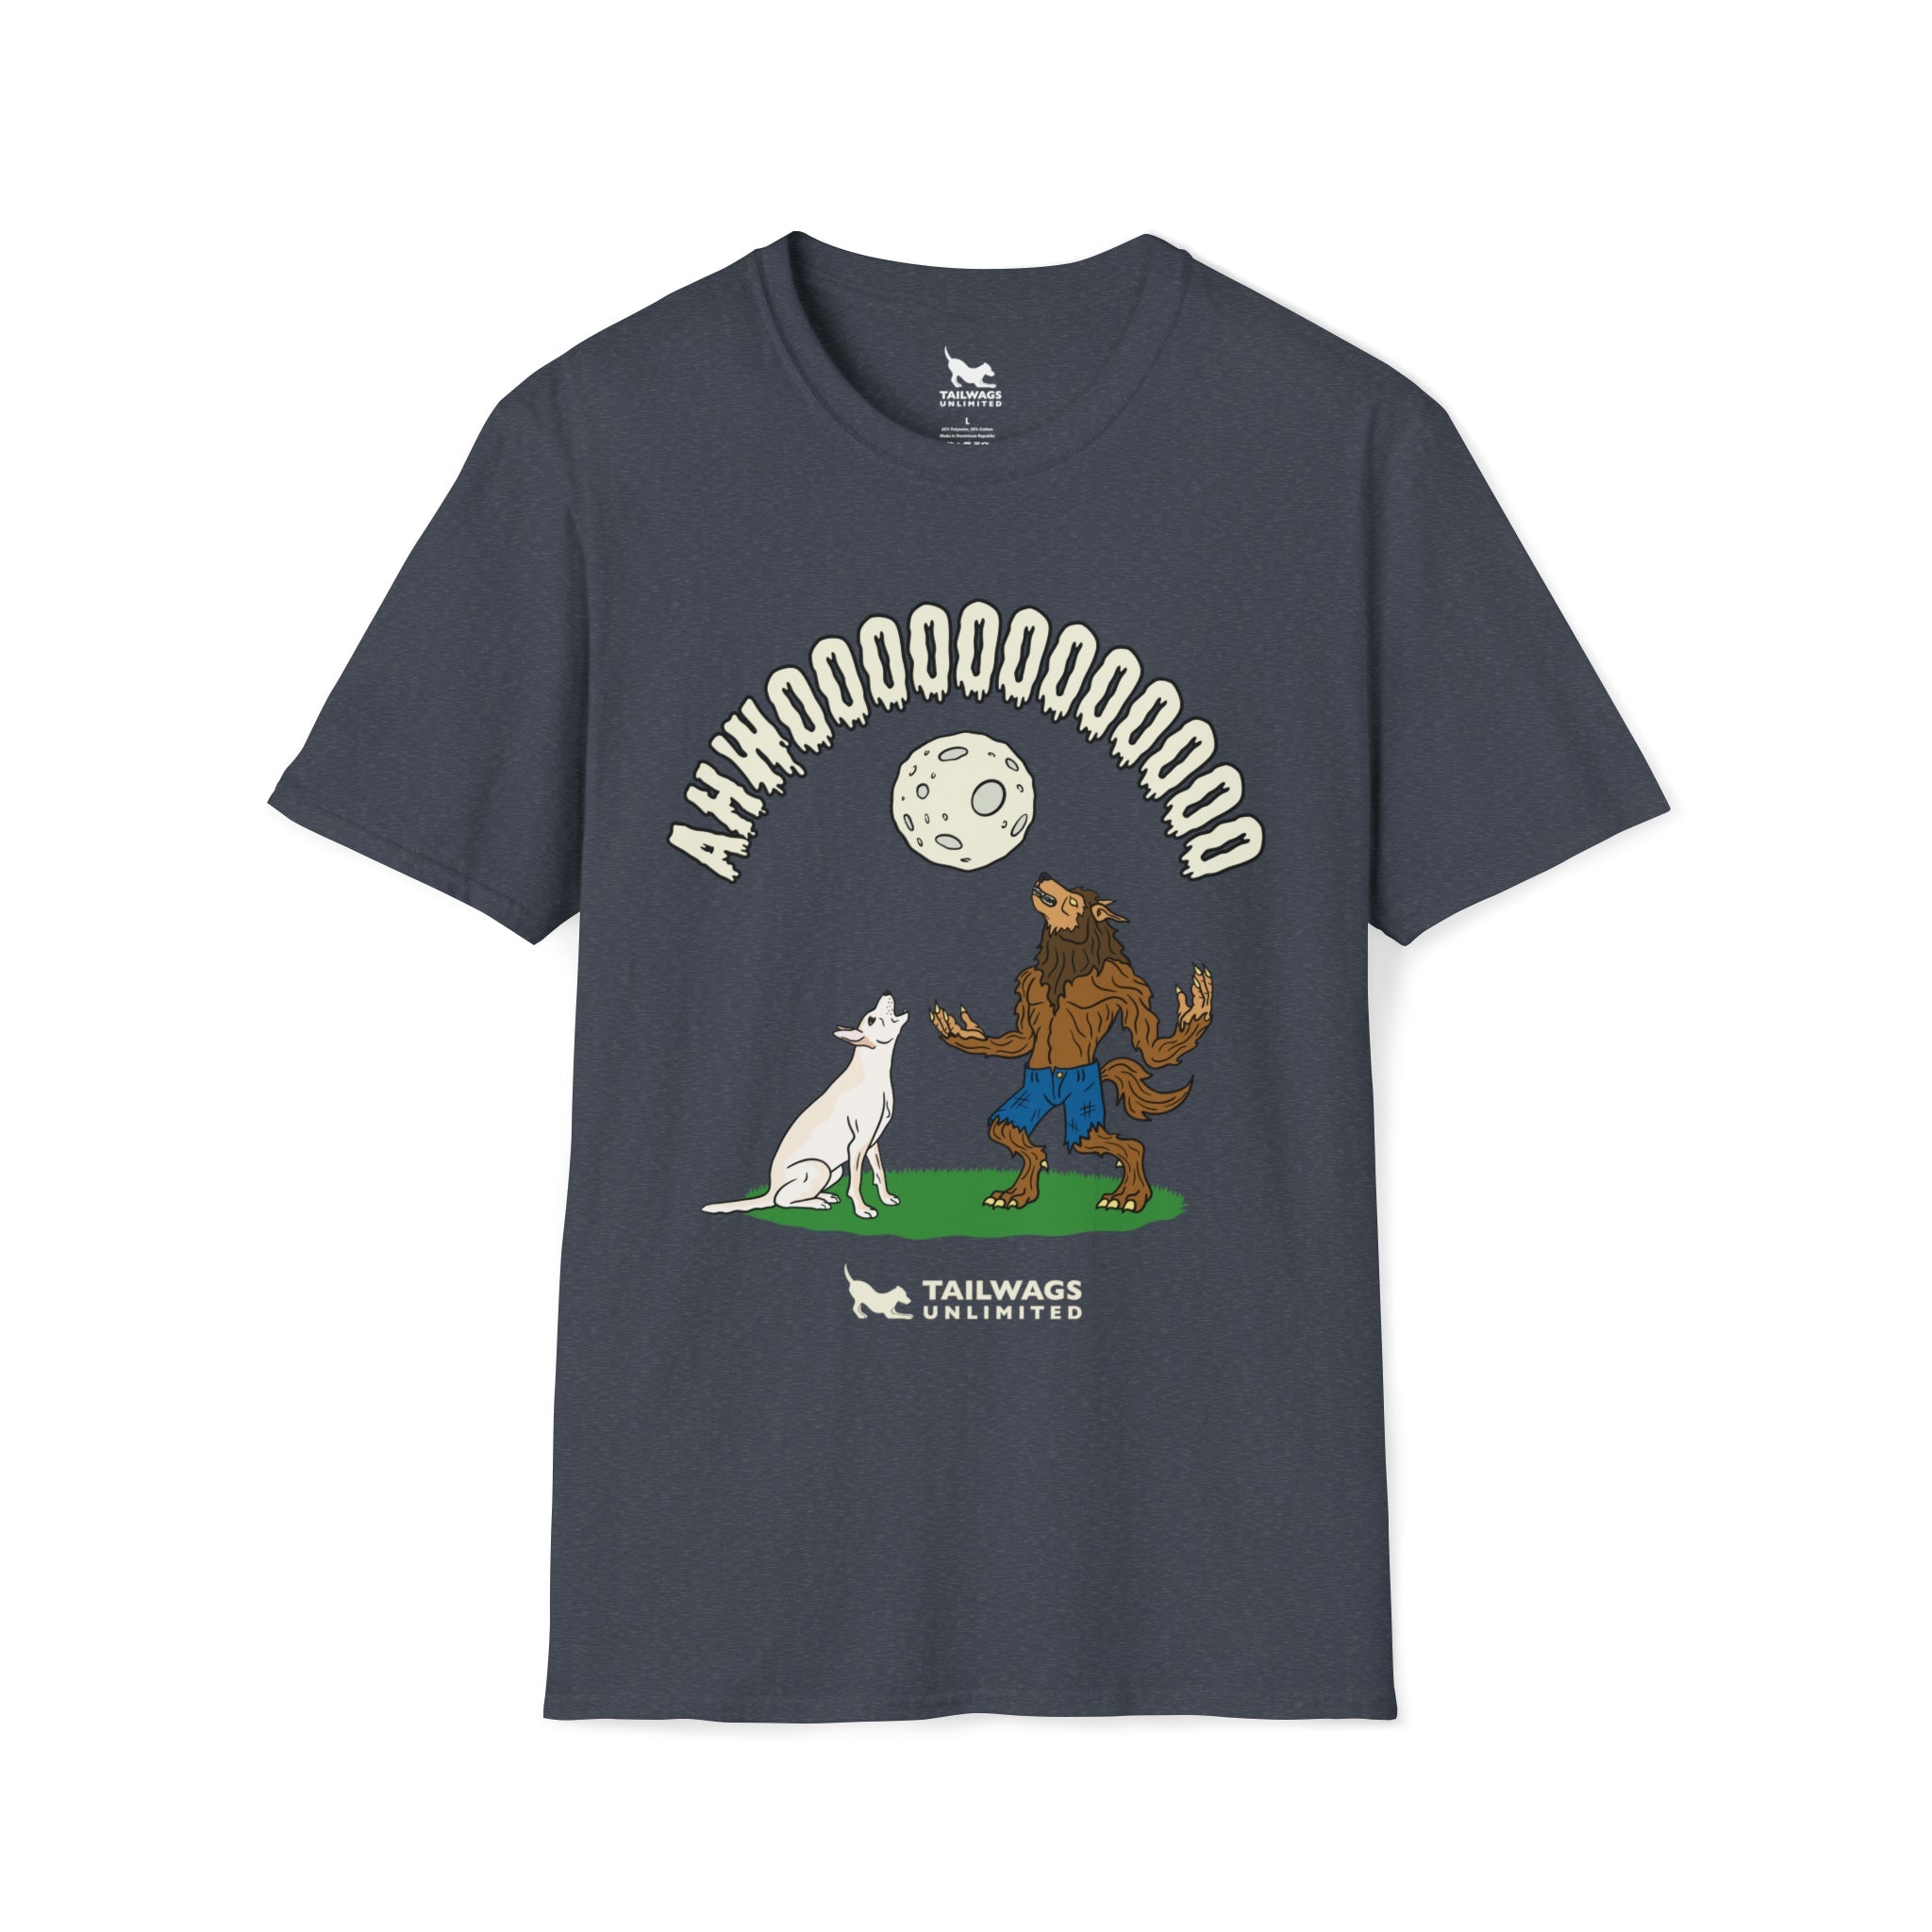 Howling at the Moon T-Shirt - TAILWAGS UNLIMITED